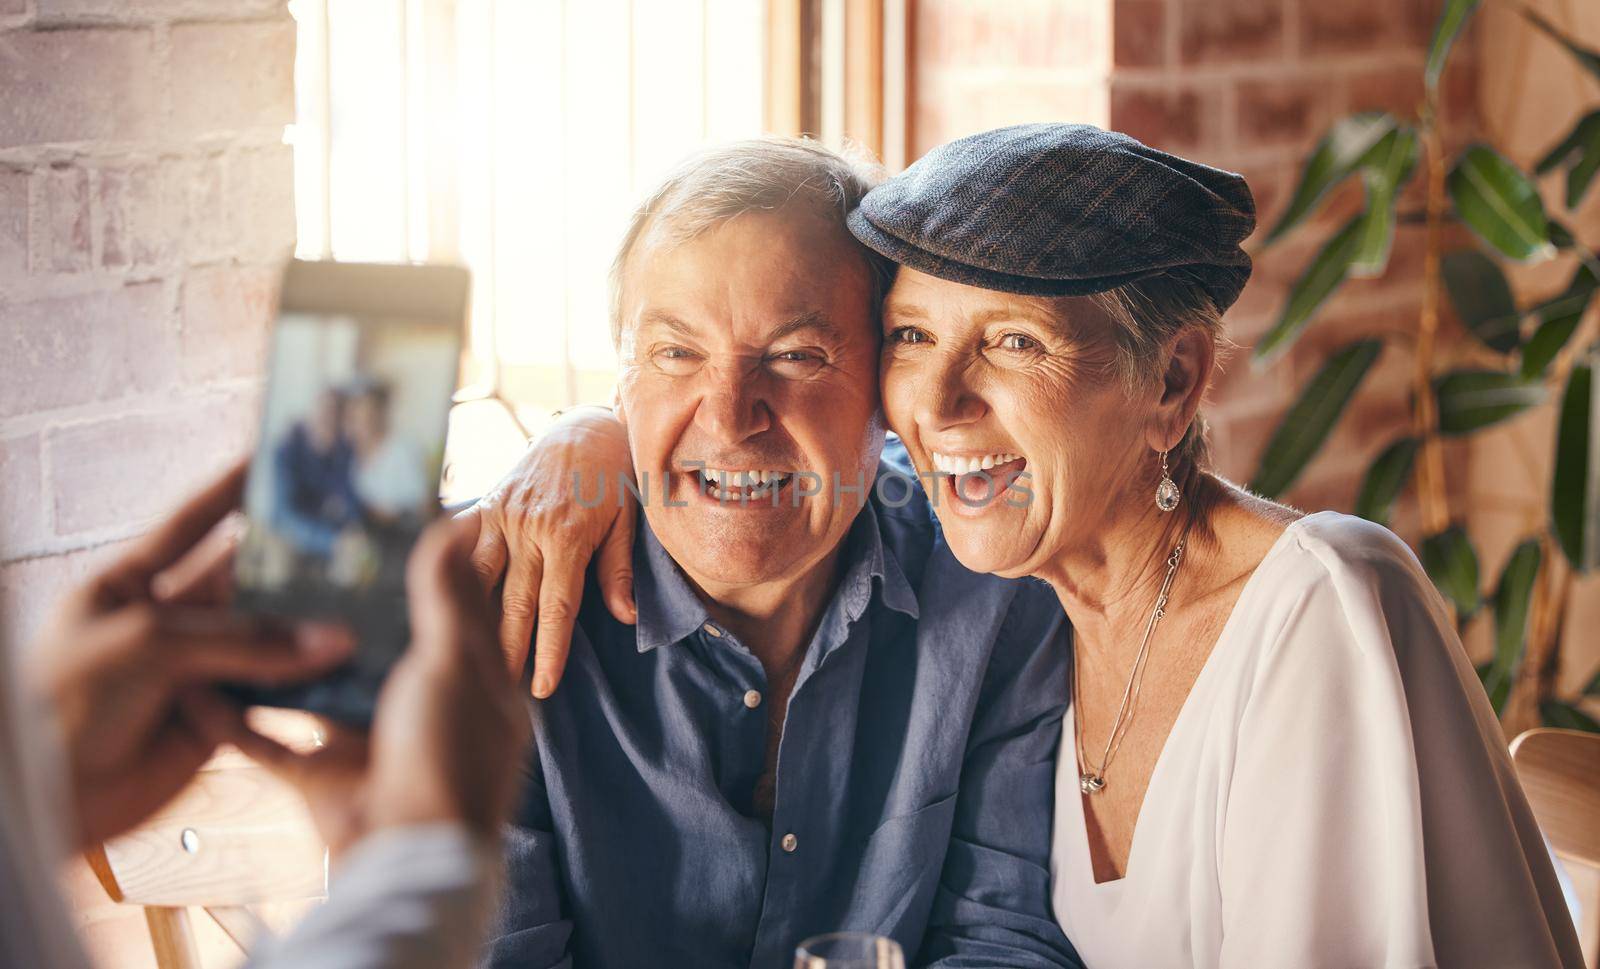 Hands, phone and photography of senior couple smile together for joy, happiness and relationship love. Elderly, retired and married man and woman smiling, excited and happy for digital mobile photo.